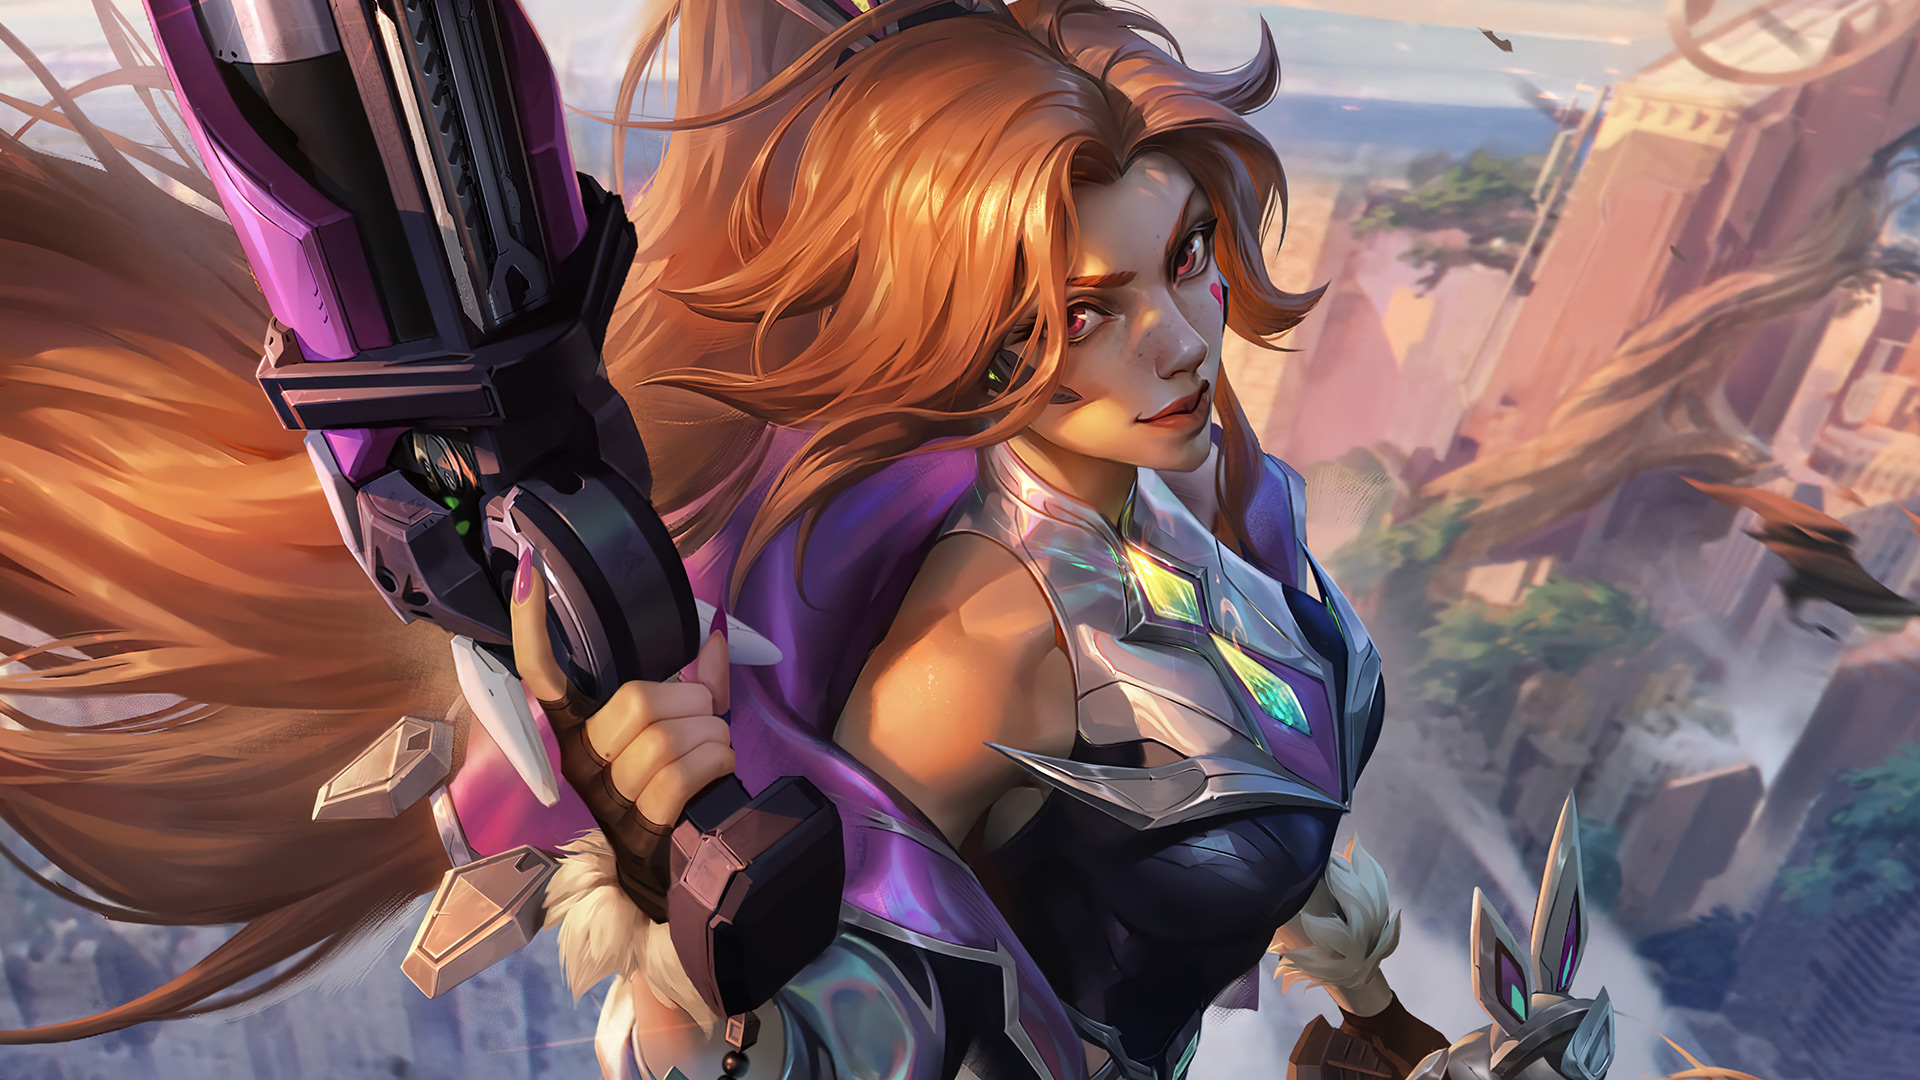 kampagne plantageejer Paranafloden TFT Set 8 champions, costs, and more | The Loadout